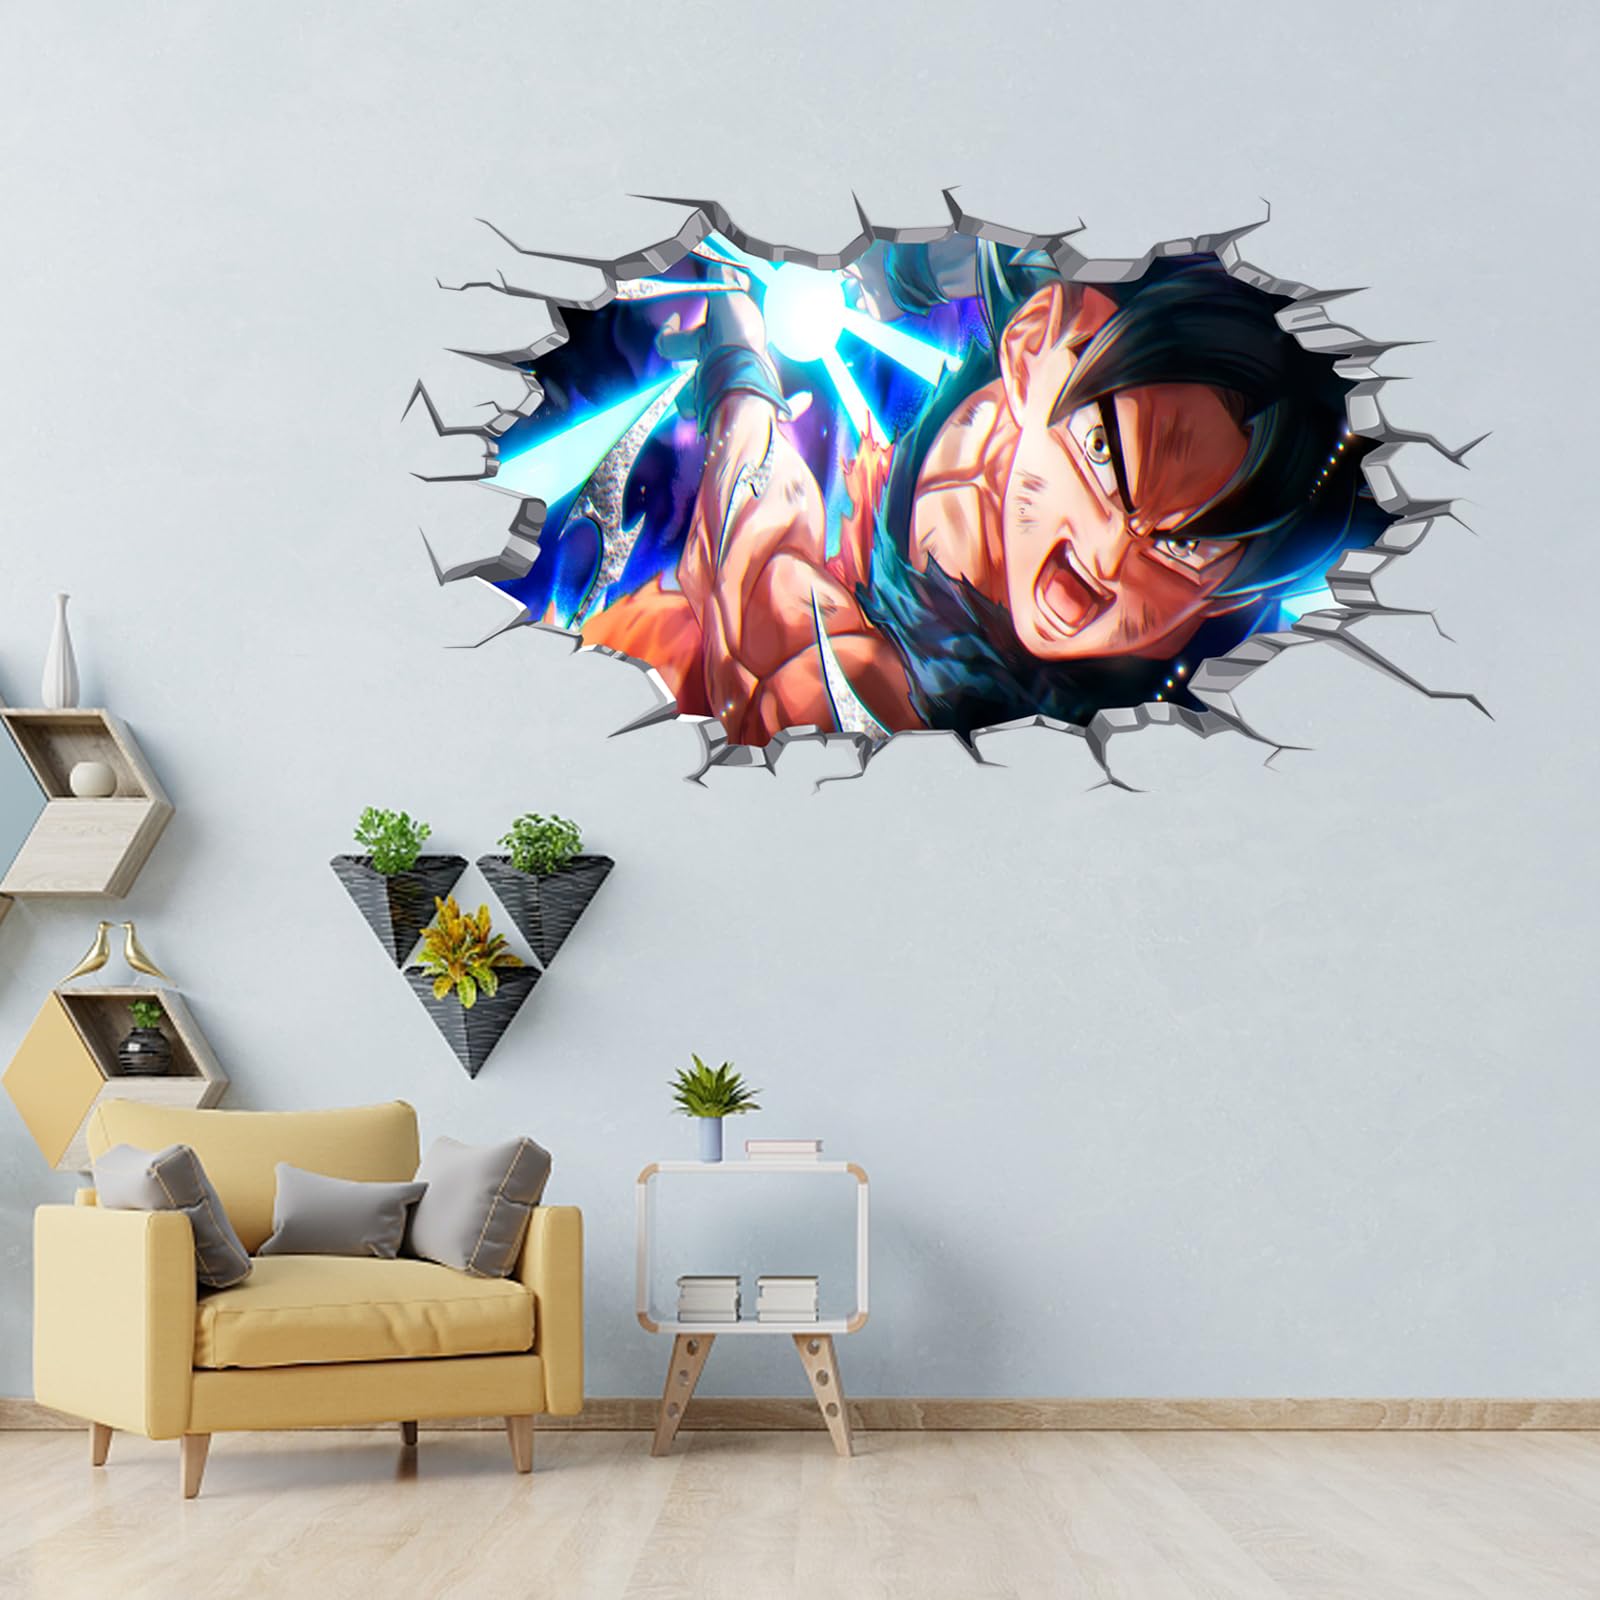 Anime Wall Murals to Match Any Home's Decor | Society6